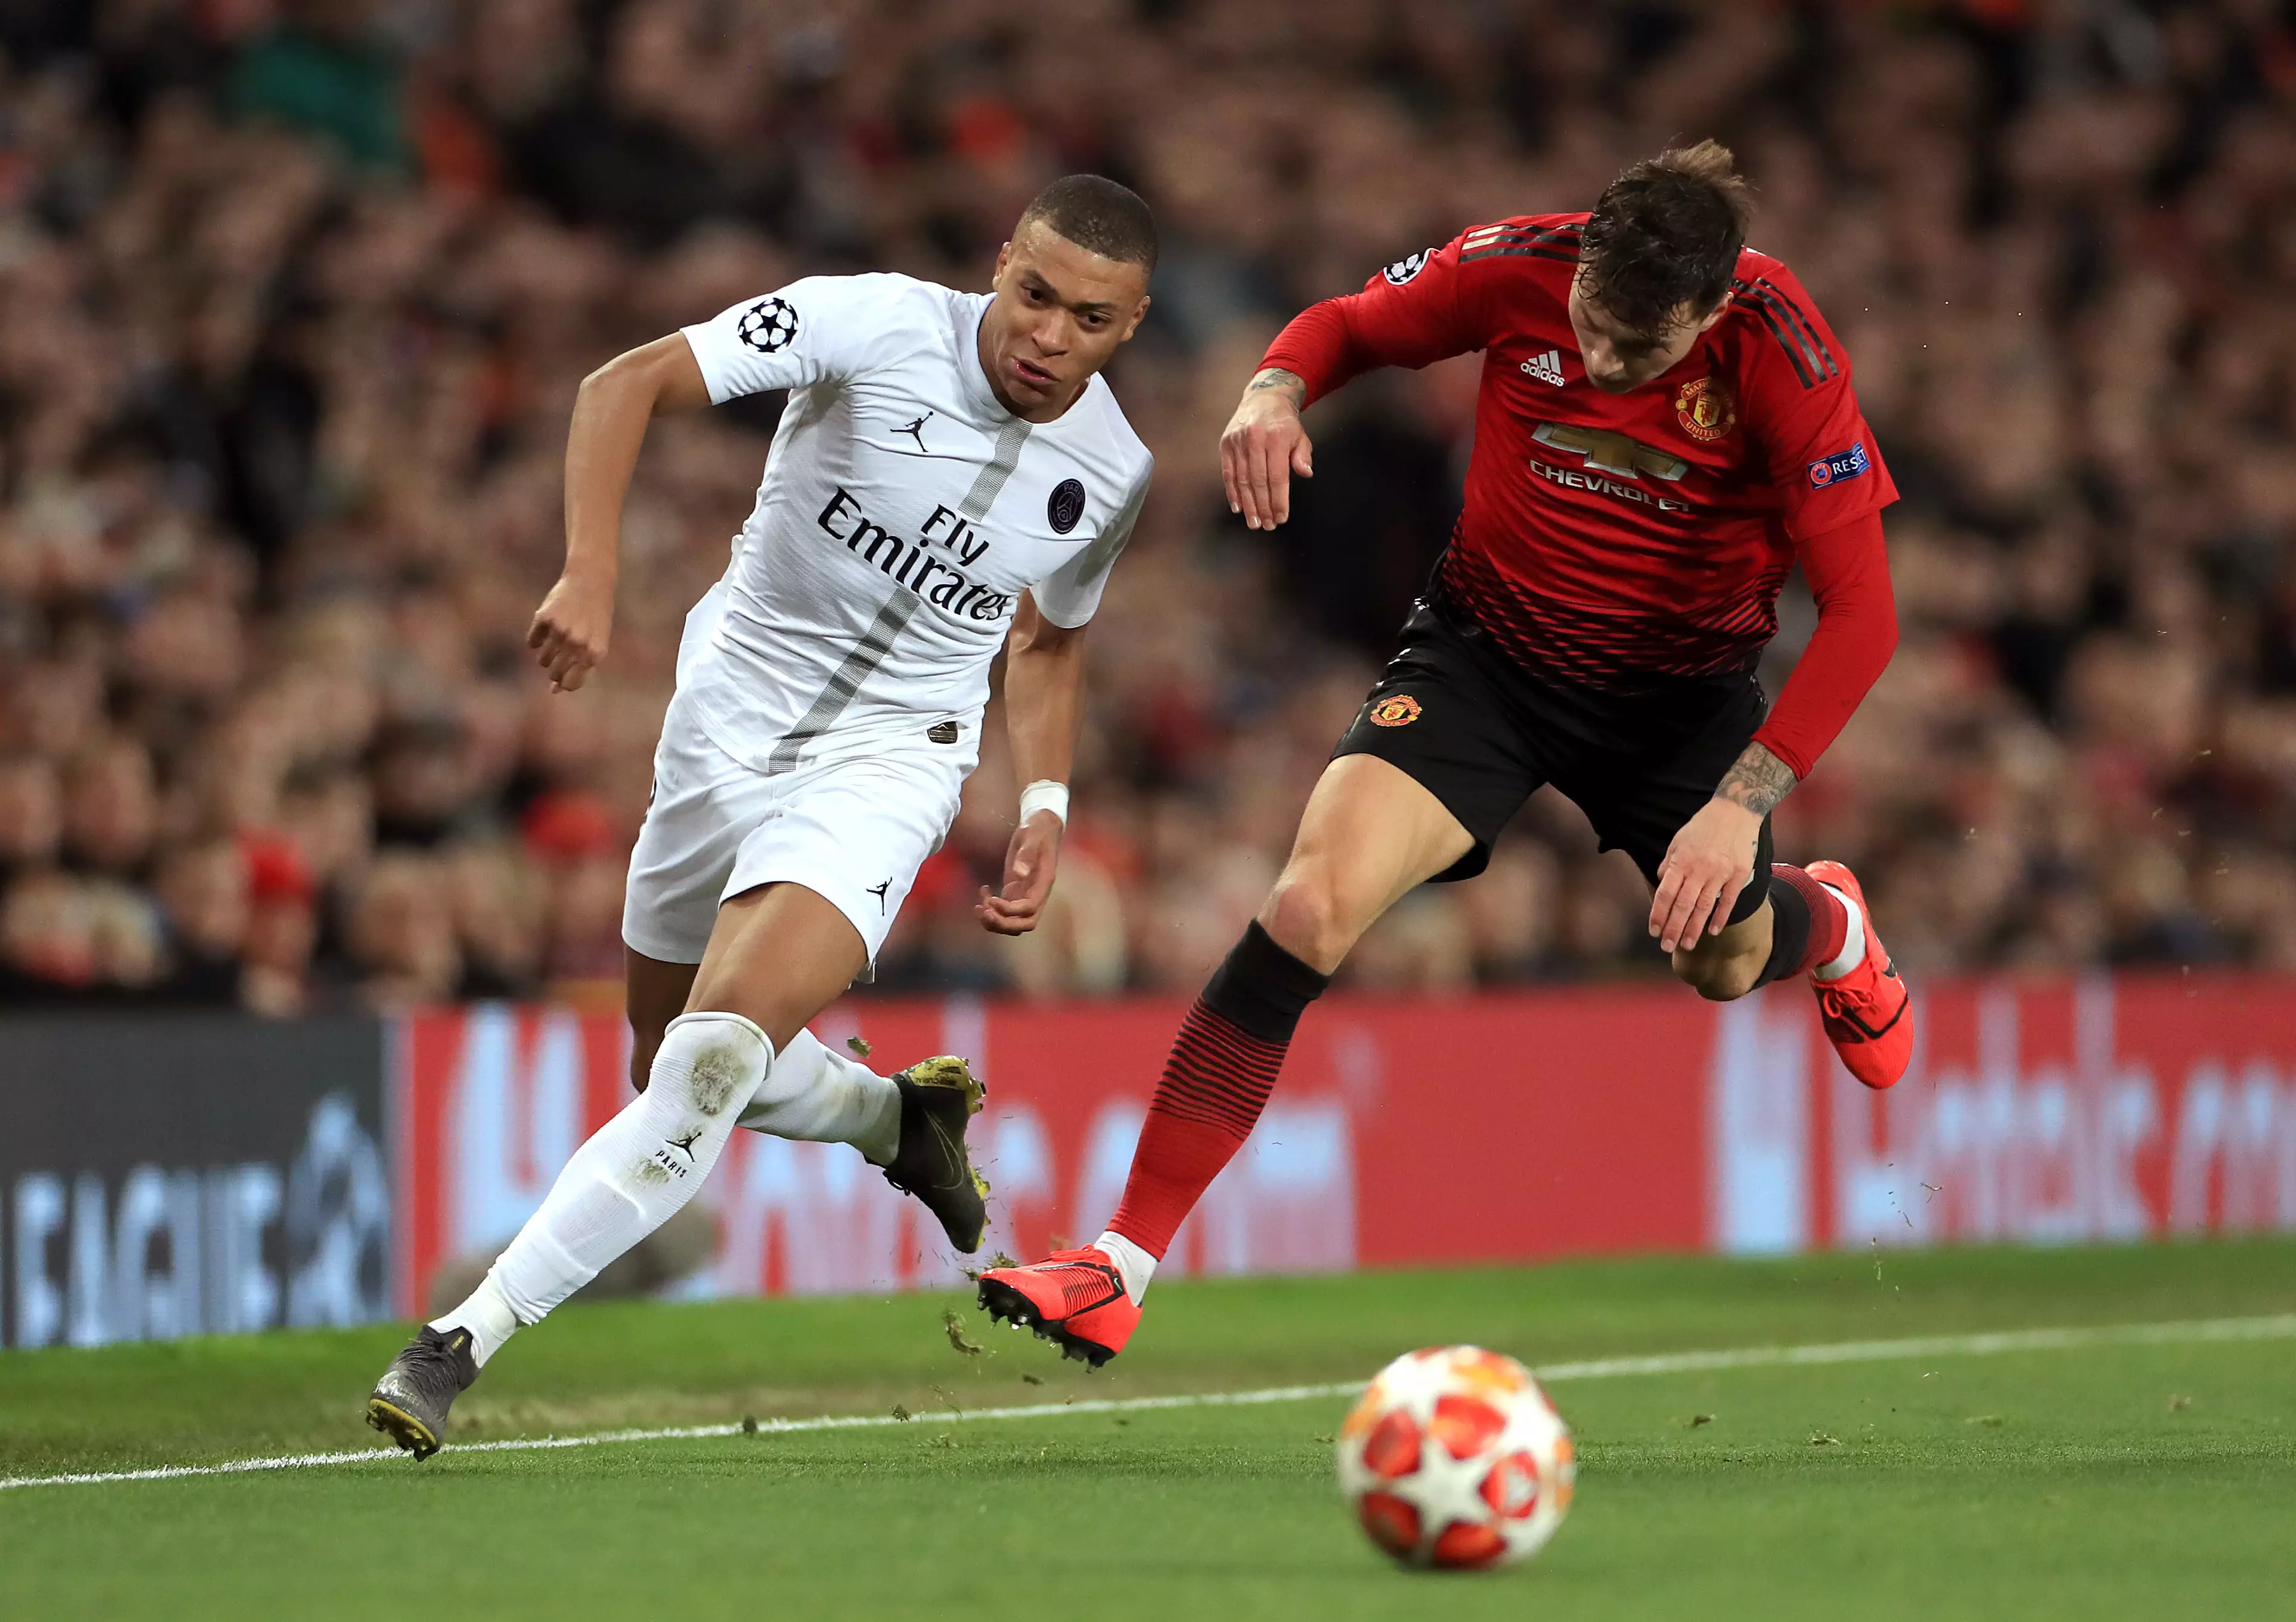 United couldn't get to grips with Mbappe. Image: PA Images